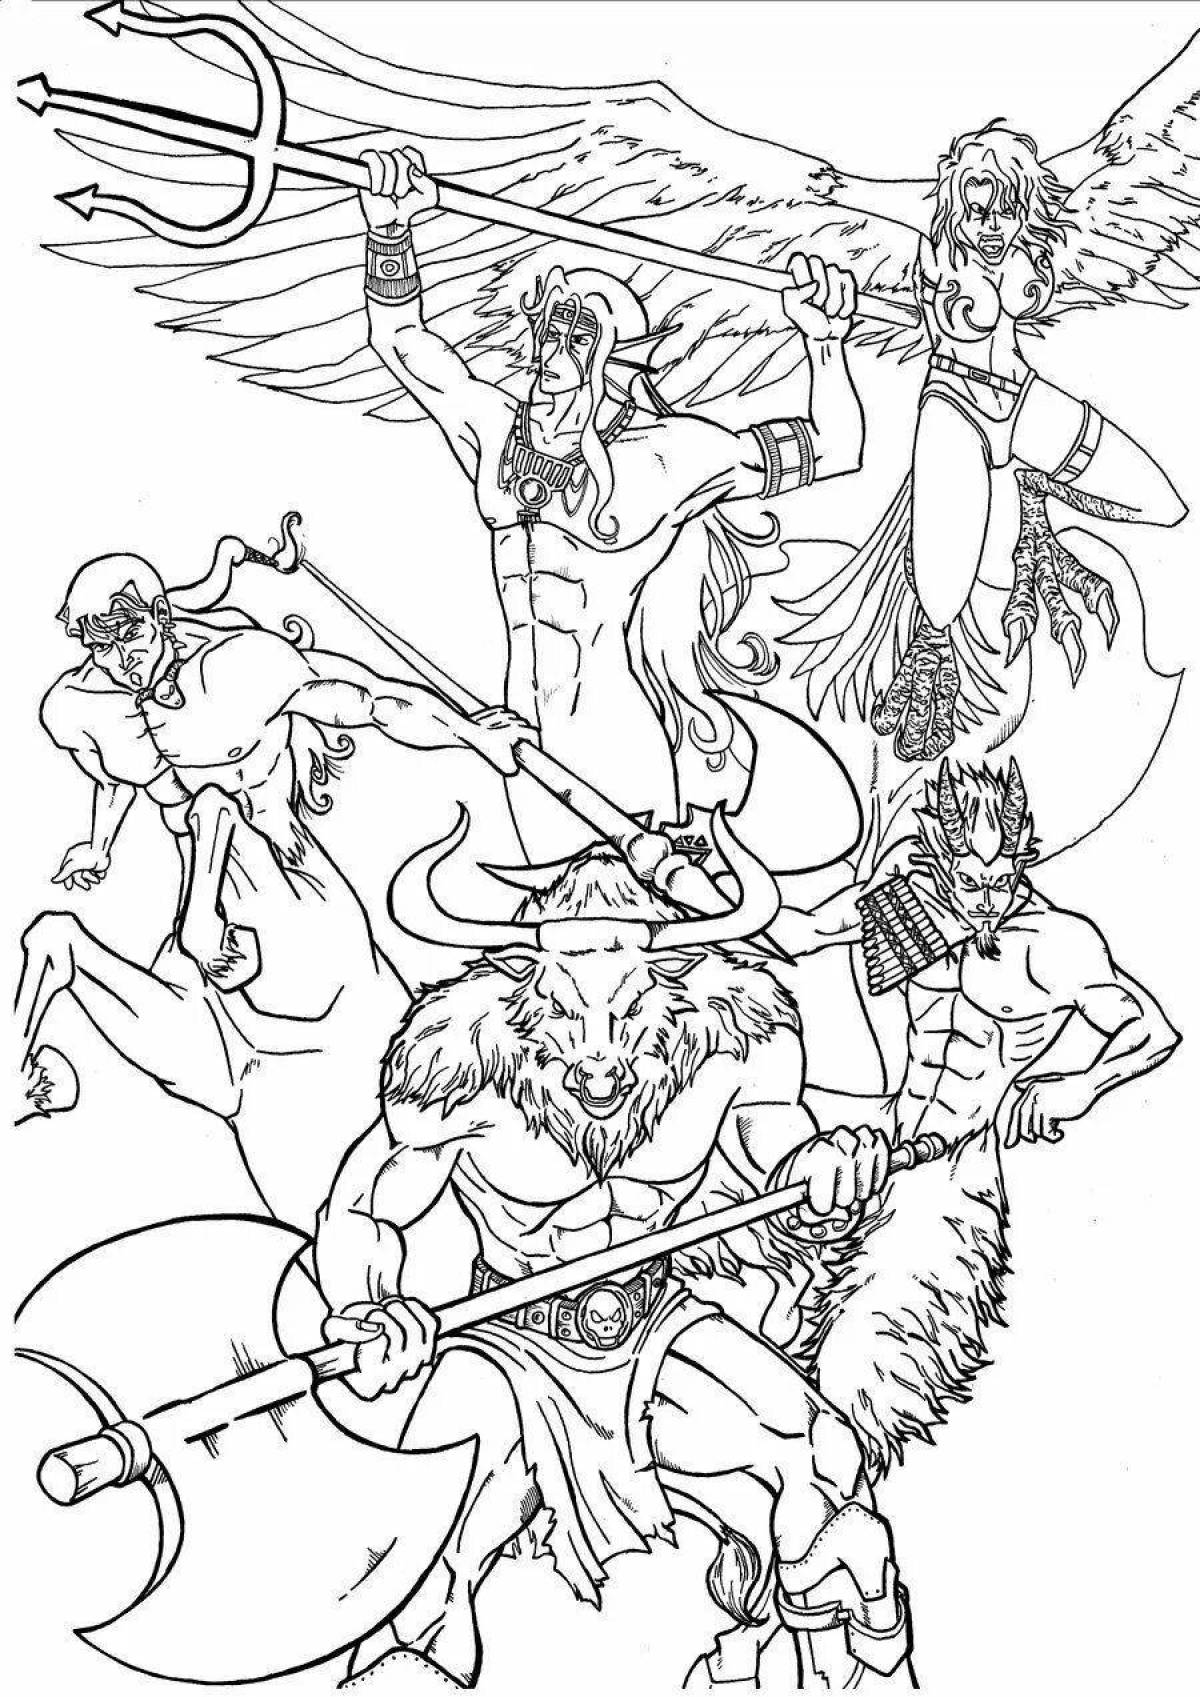 Fun coloring book based on myths